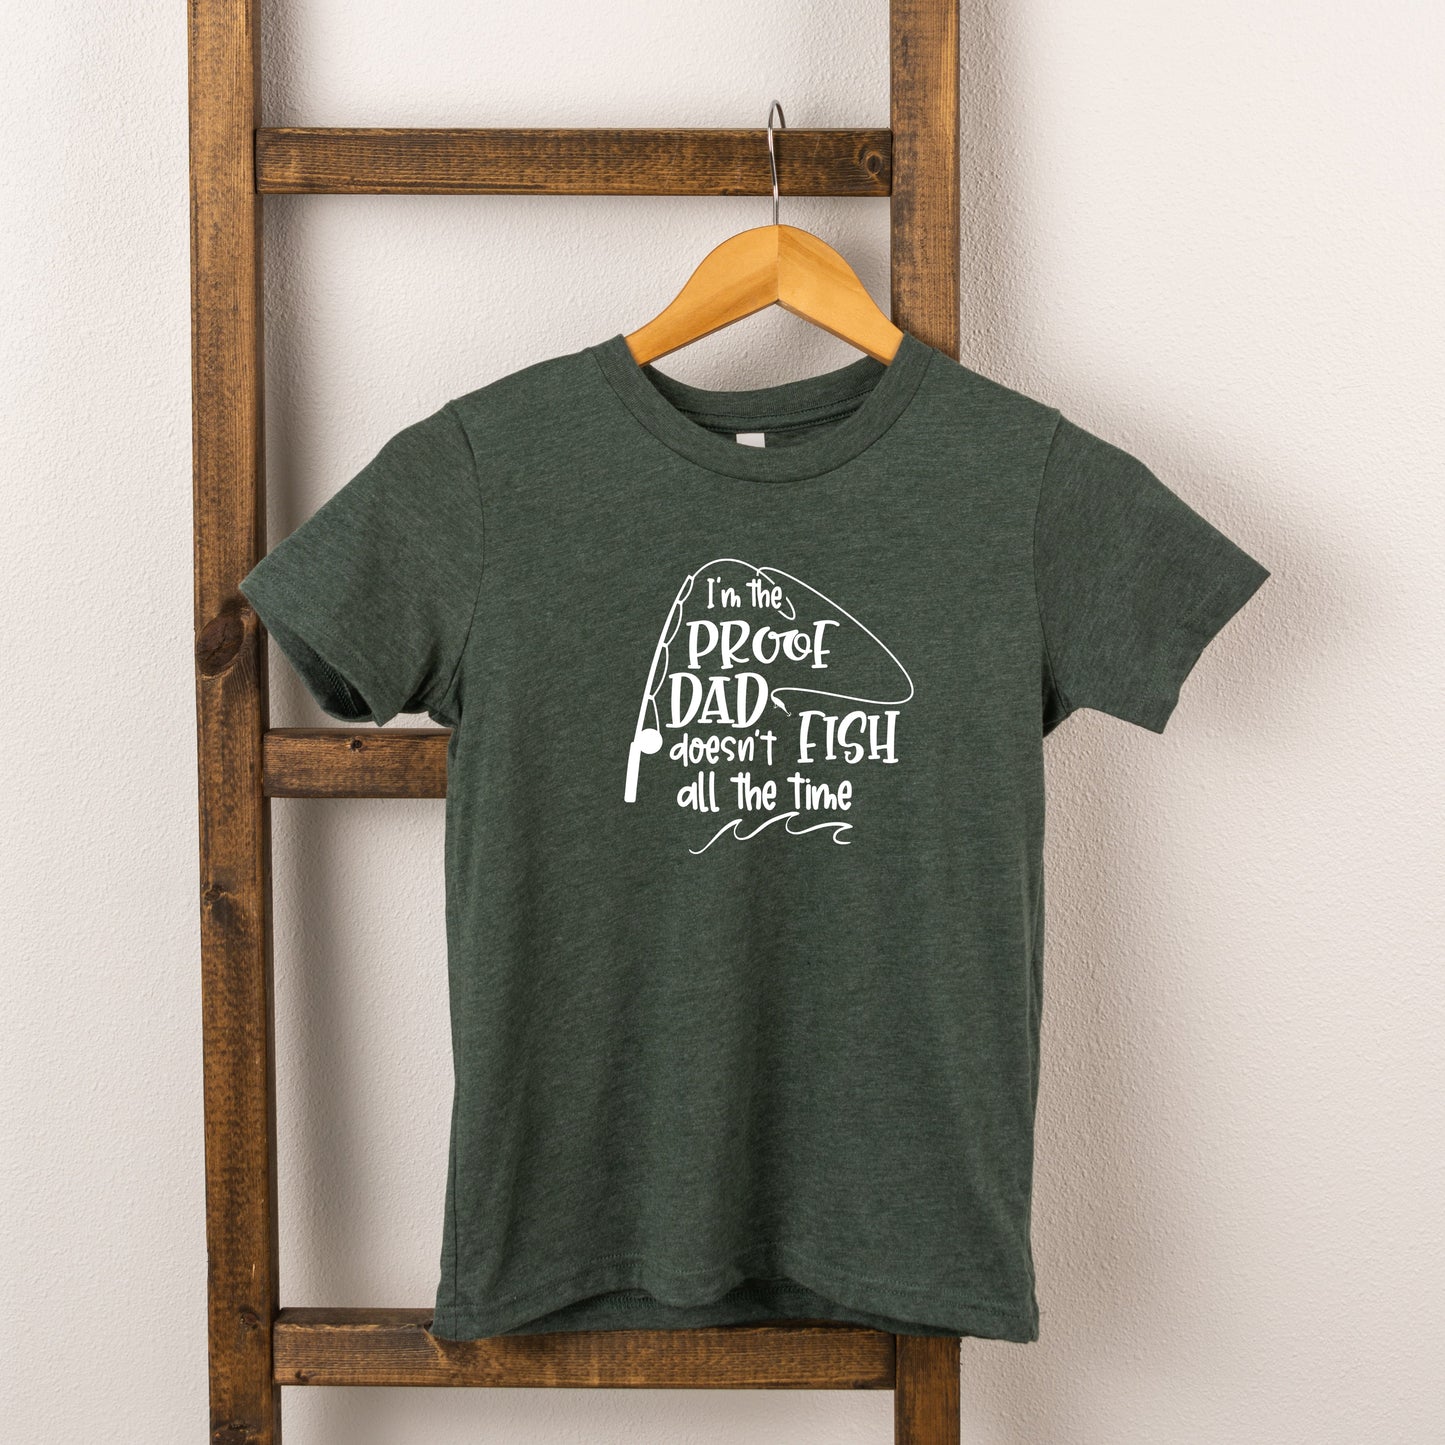 Proof Dad Doesn't Fish All The Time | Toddler Short Sleeve Crew Neck